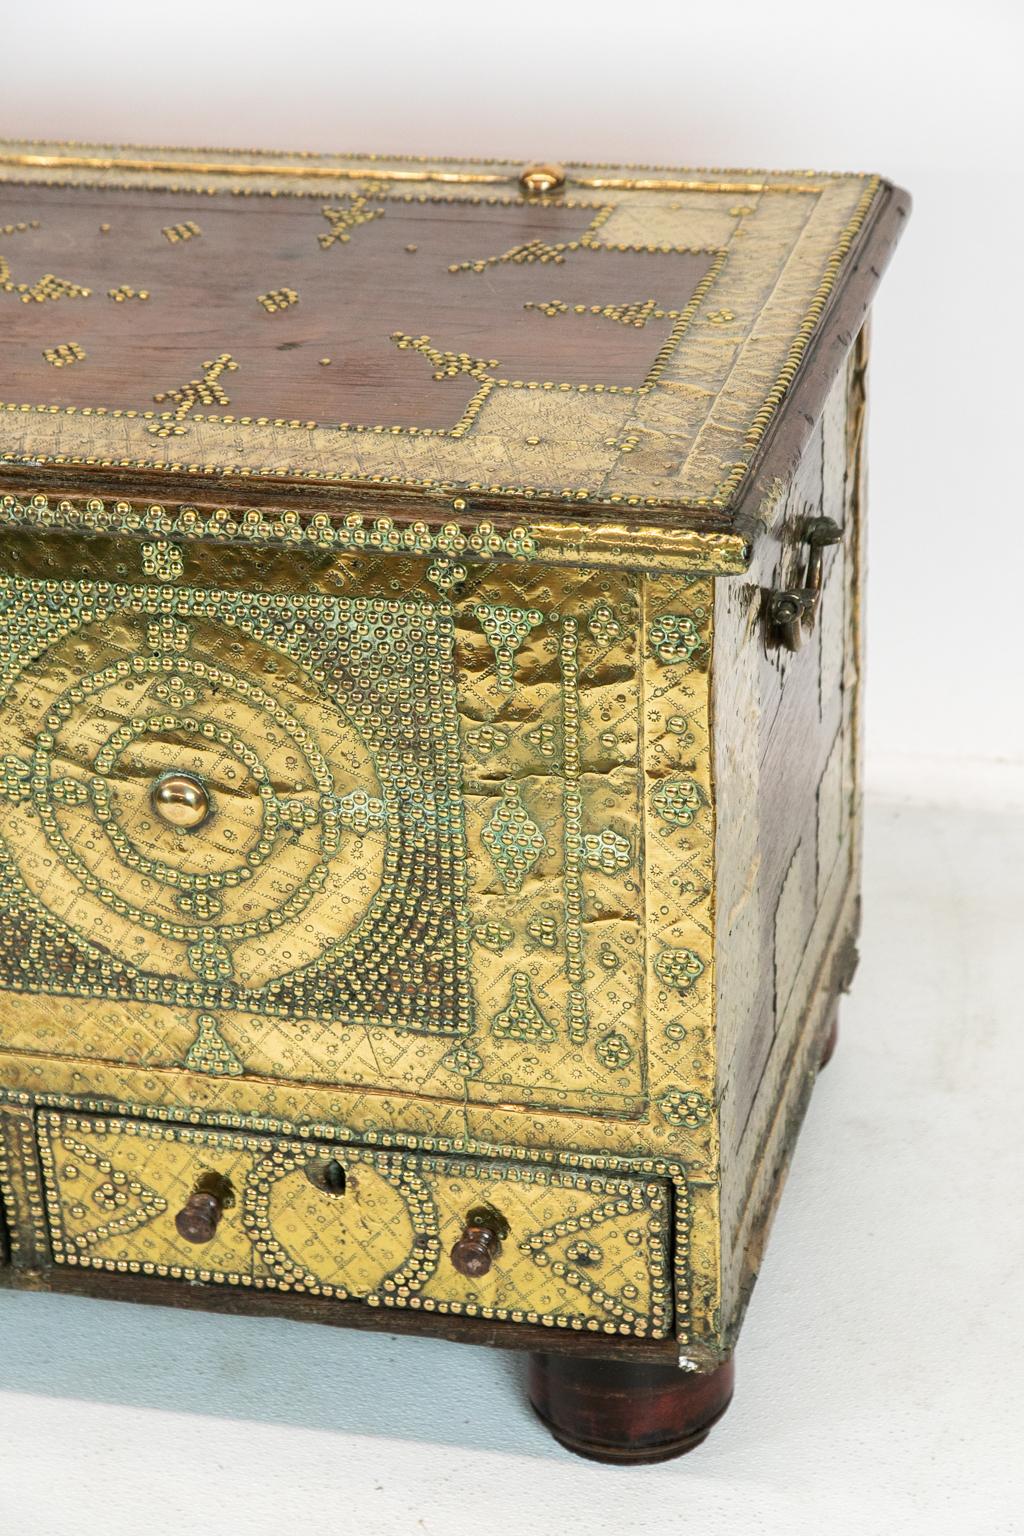 Brass overlay Zanzibar blanket chest, elaborate brass stud work with engraved brass edging on the front and sides. There are original rat tail hinges and a reticulated hasp lock.